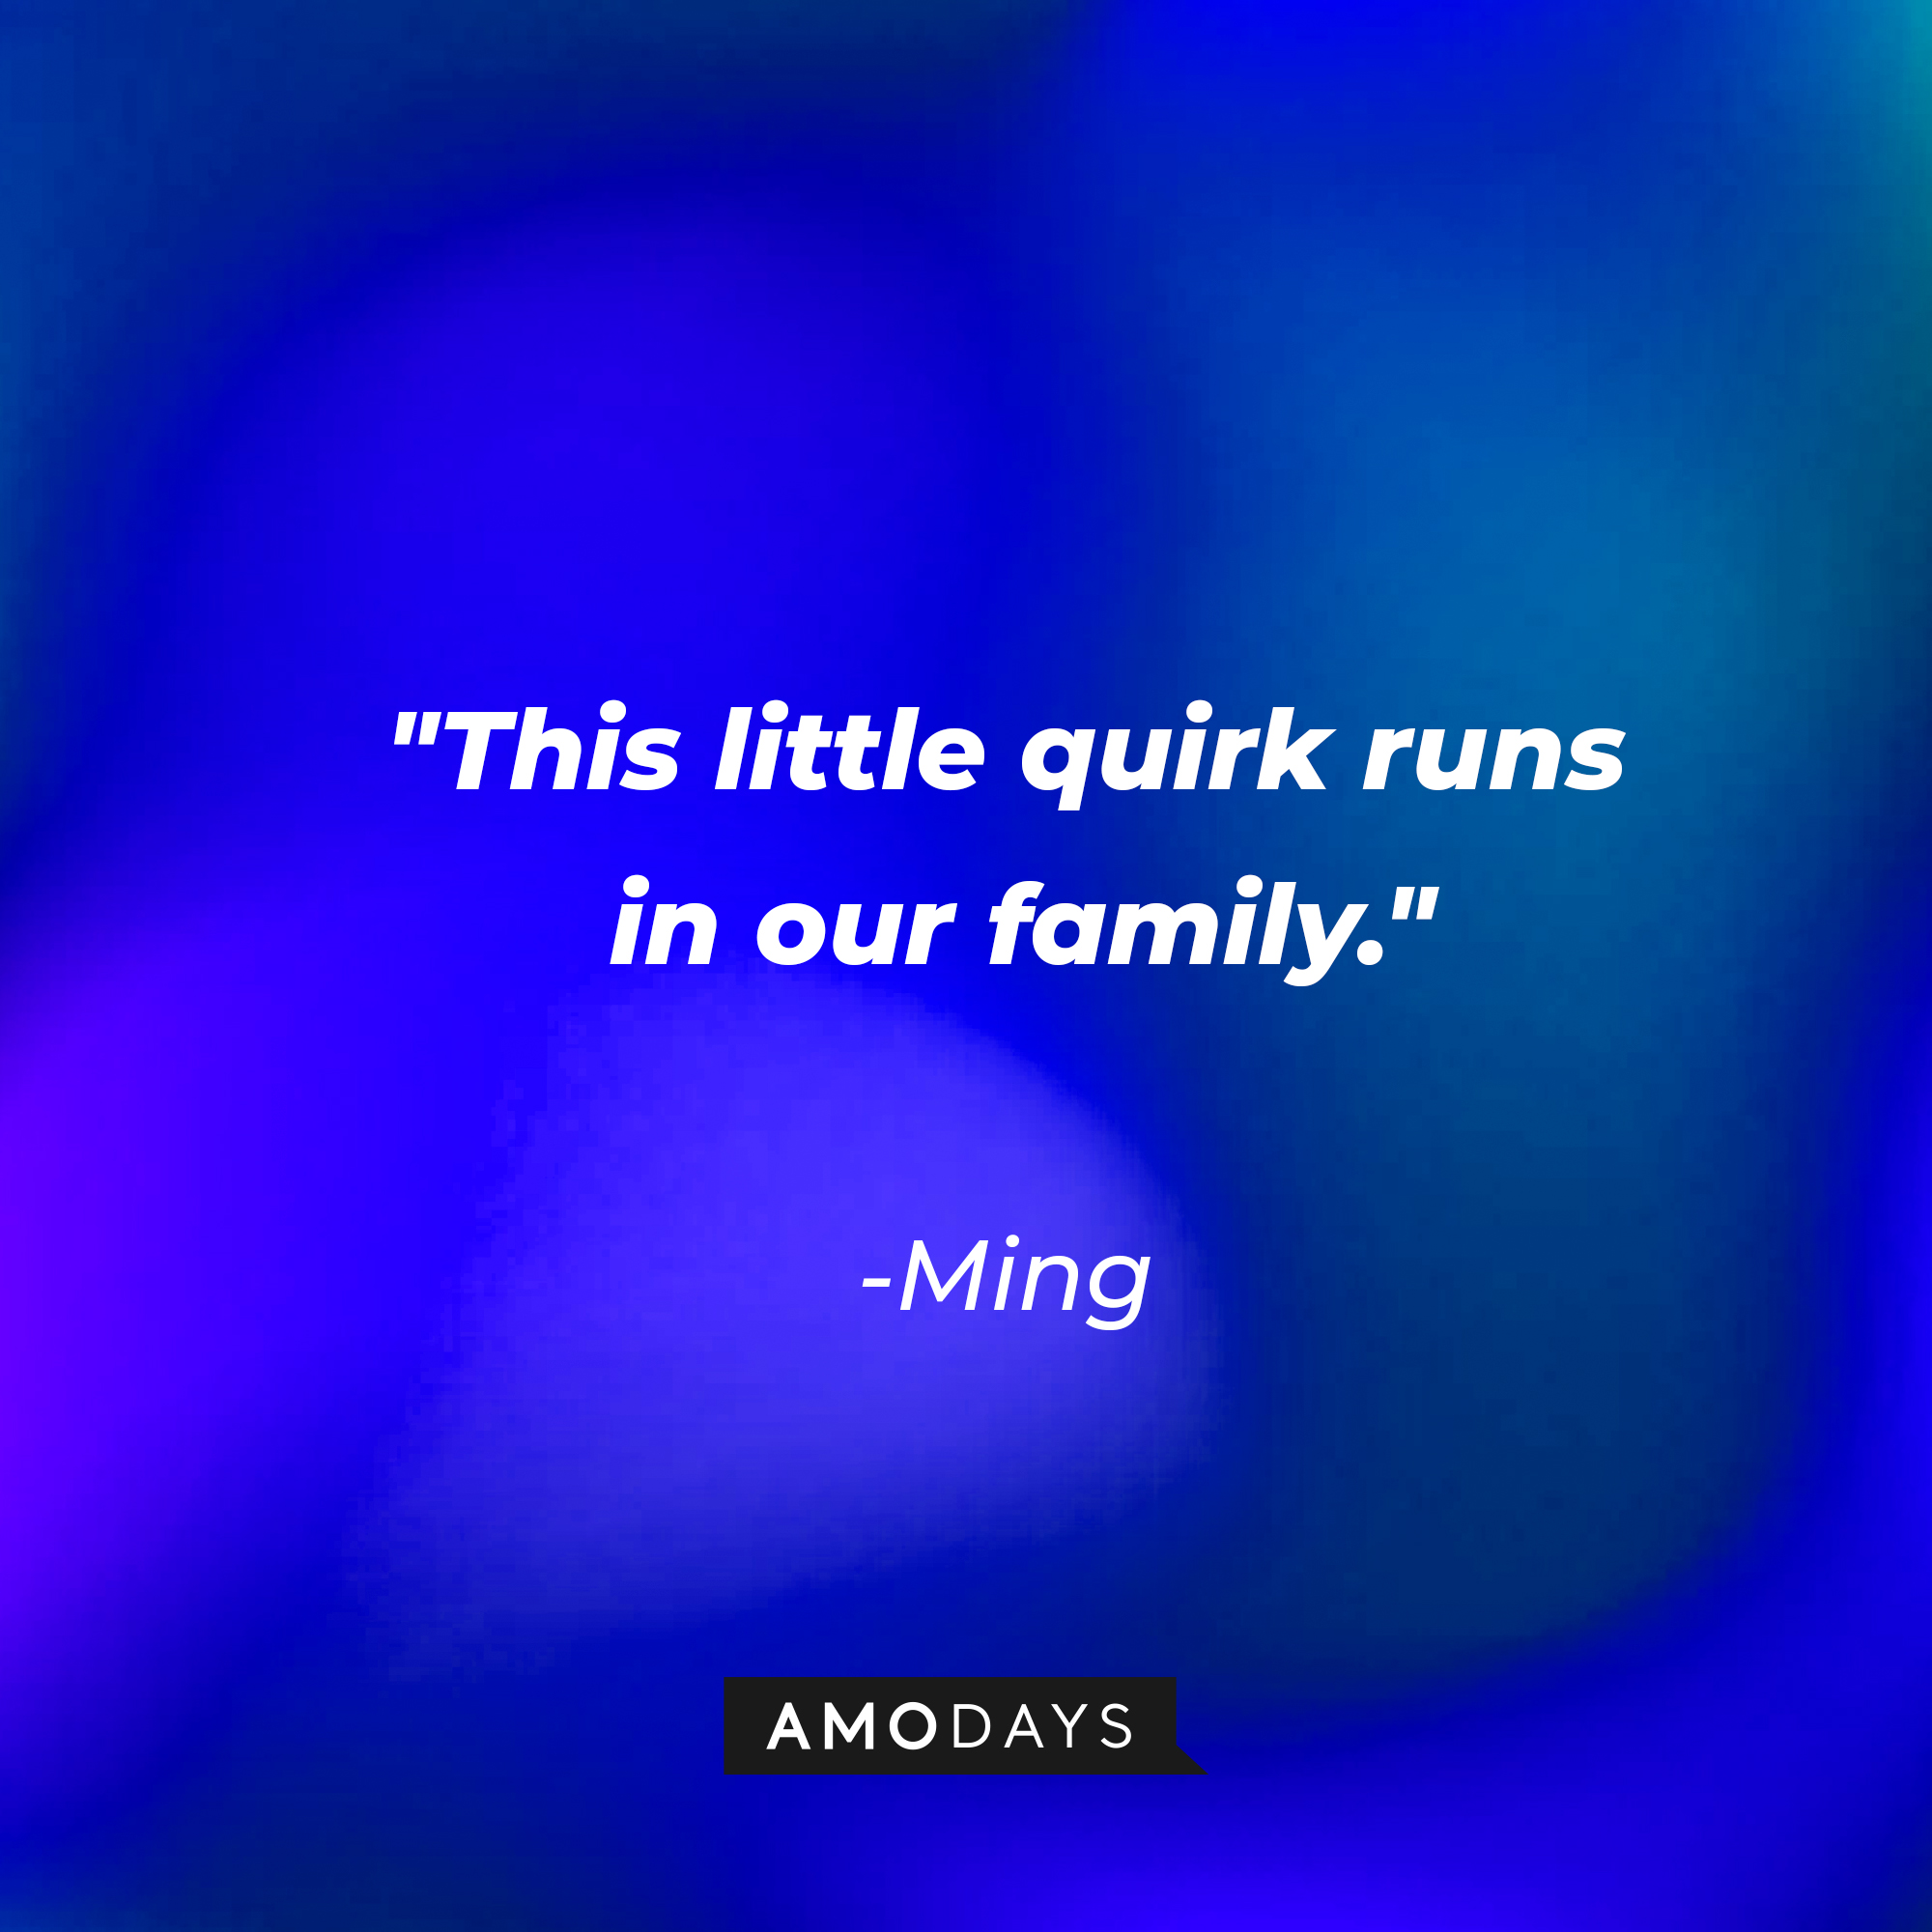 Ming's quote: "This little quirk runs in our family." | Source: AmoDays